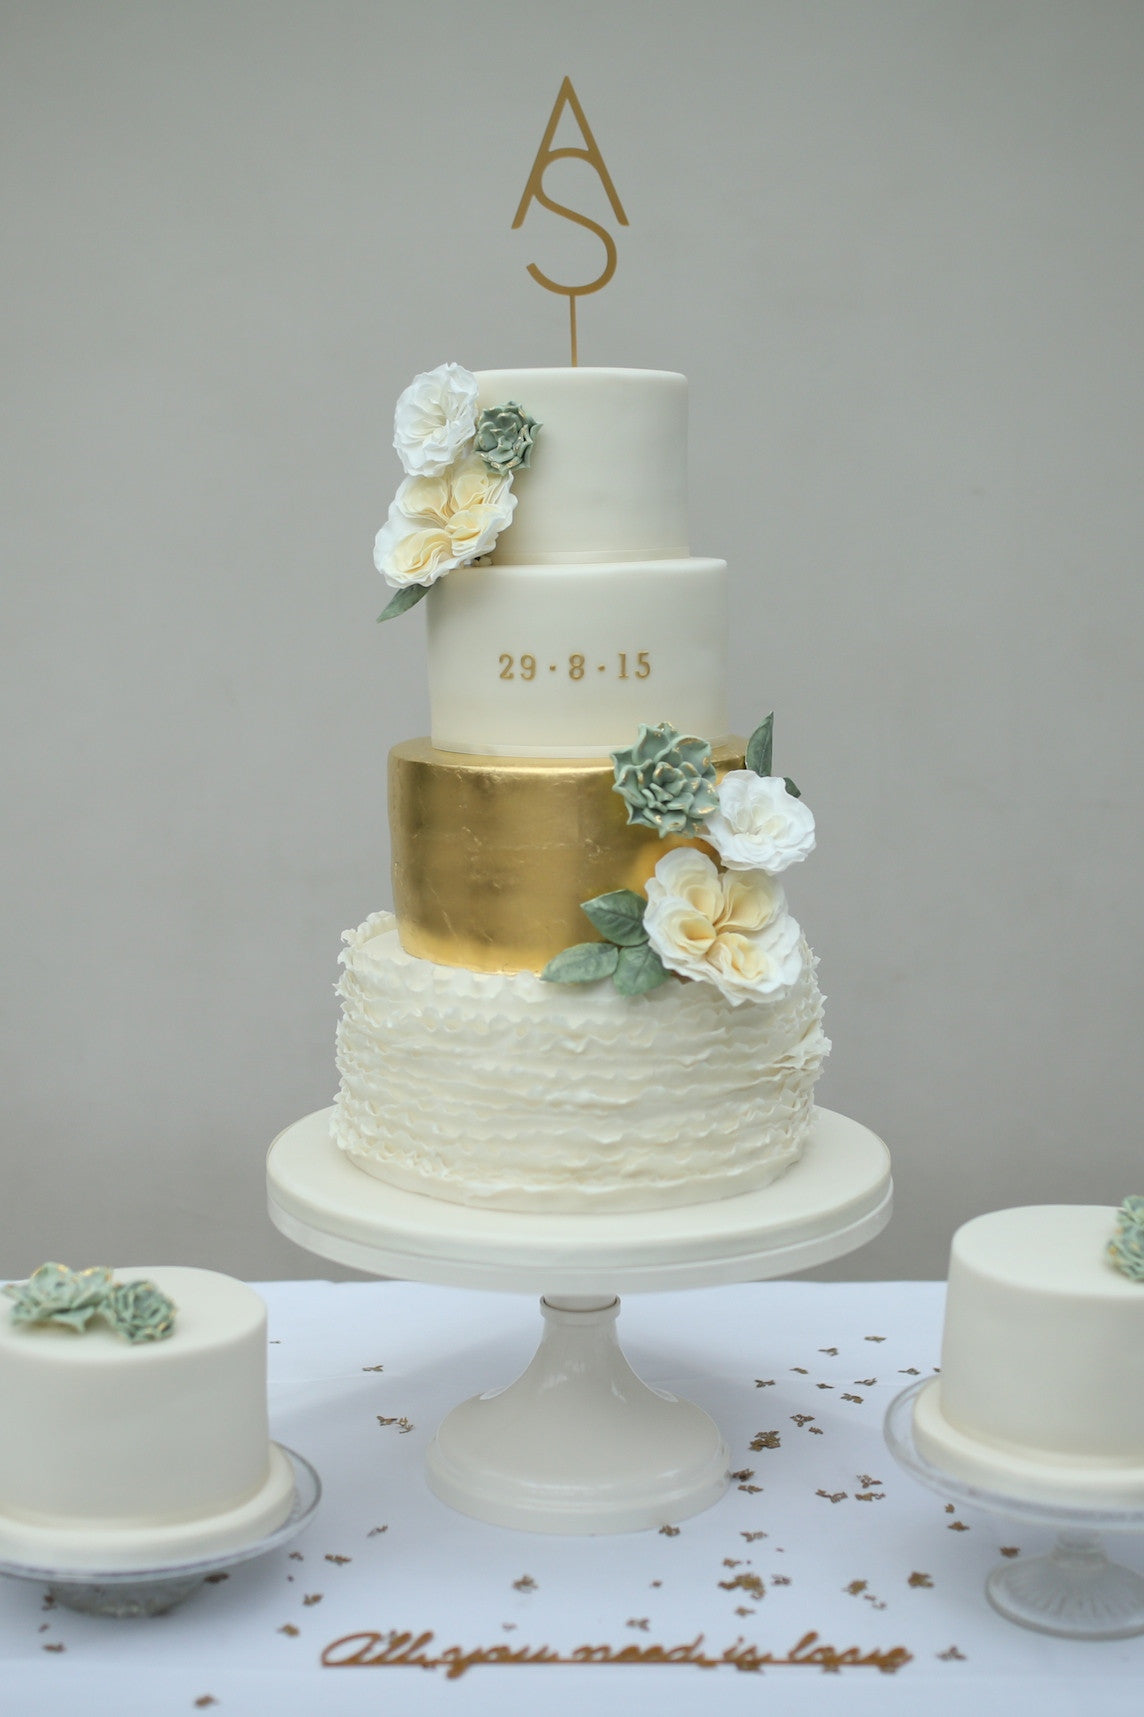 Wedding Cake with Succulents, Gold Leaf and Ruffles